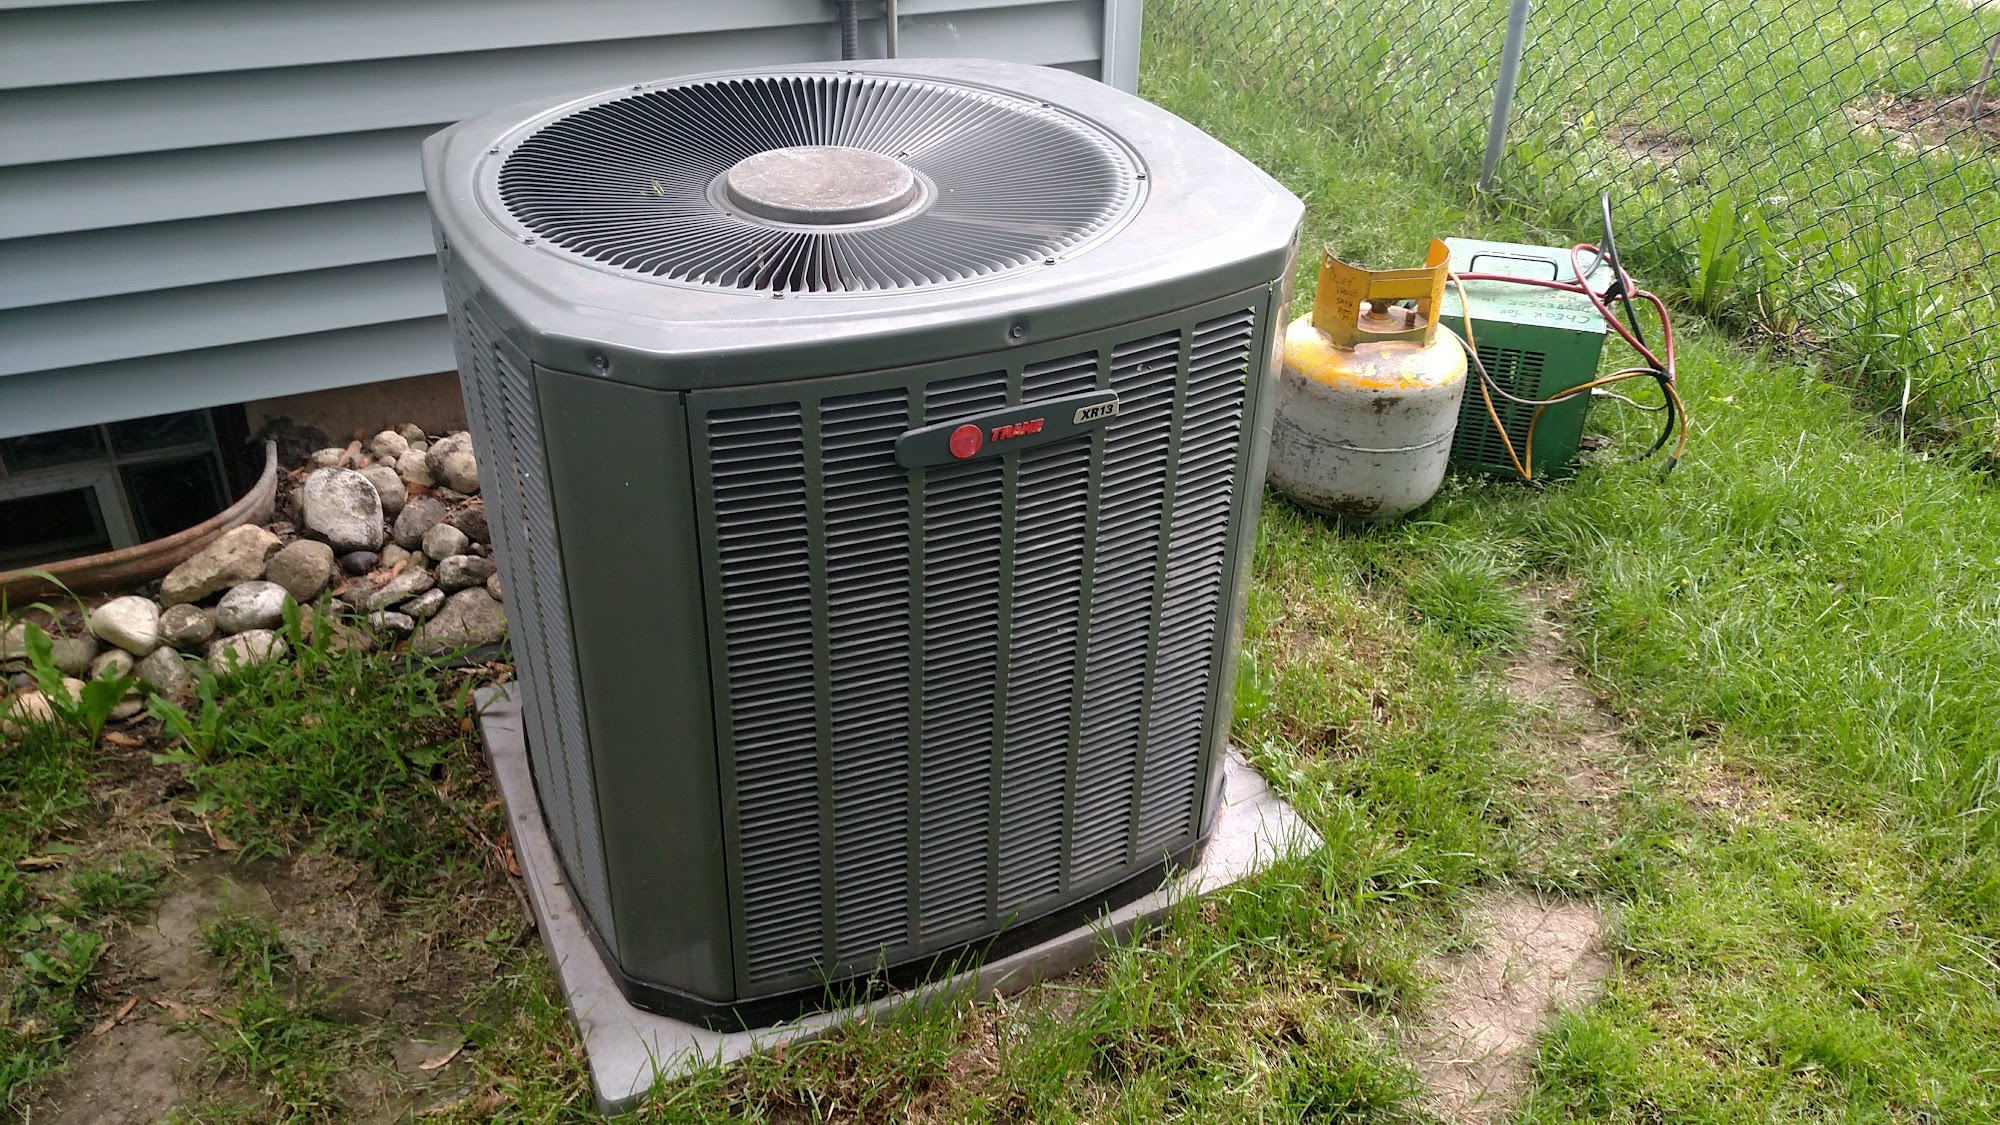 One Call Heating & Cooling 1000 Schmidt Dr, Hampshire Illinois 60140